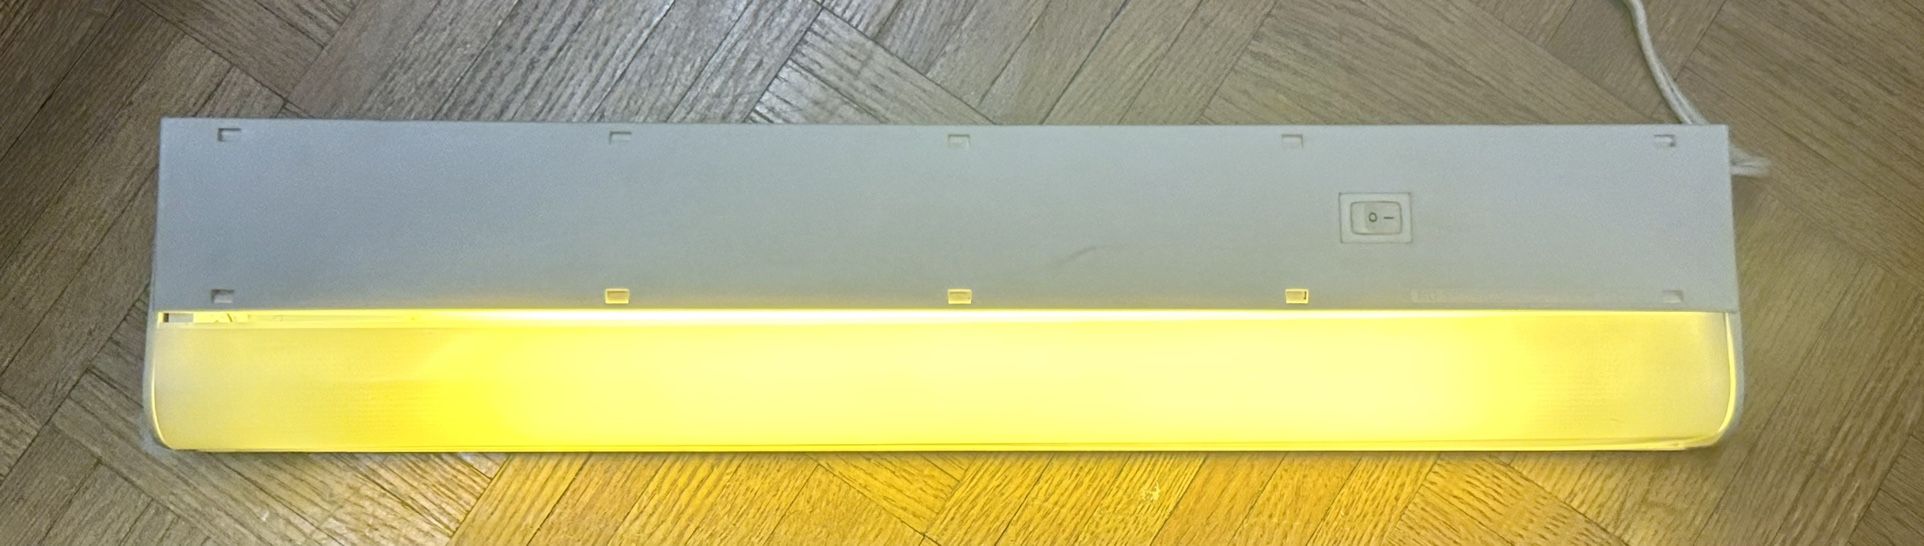 Used 18 inch Under-Cabinet Fluorescent Light Portable Lamp